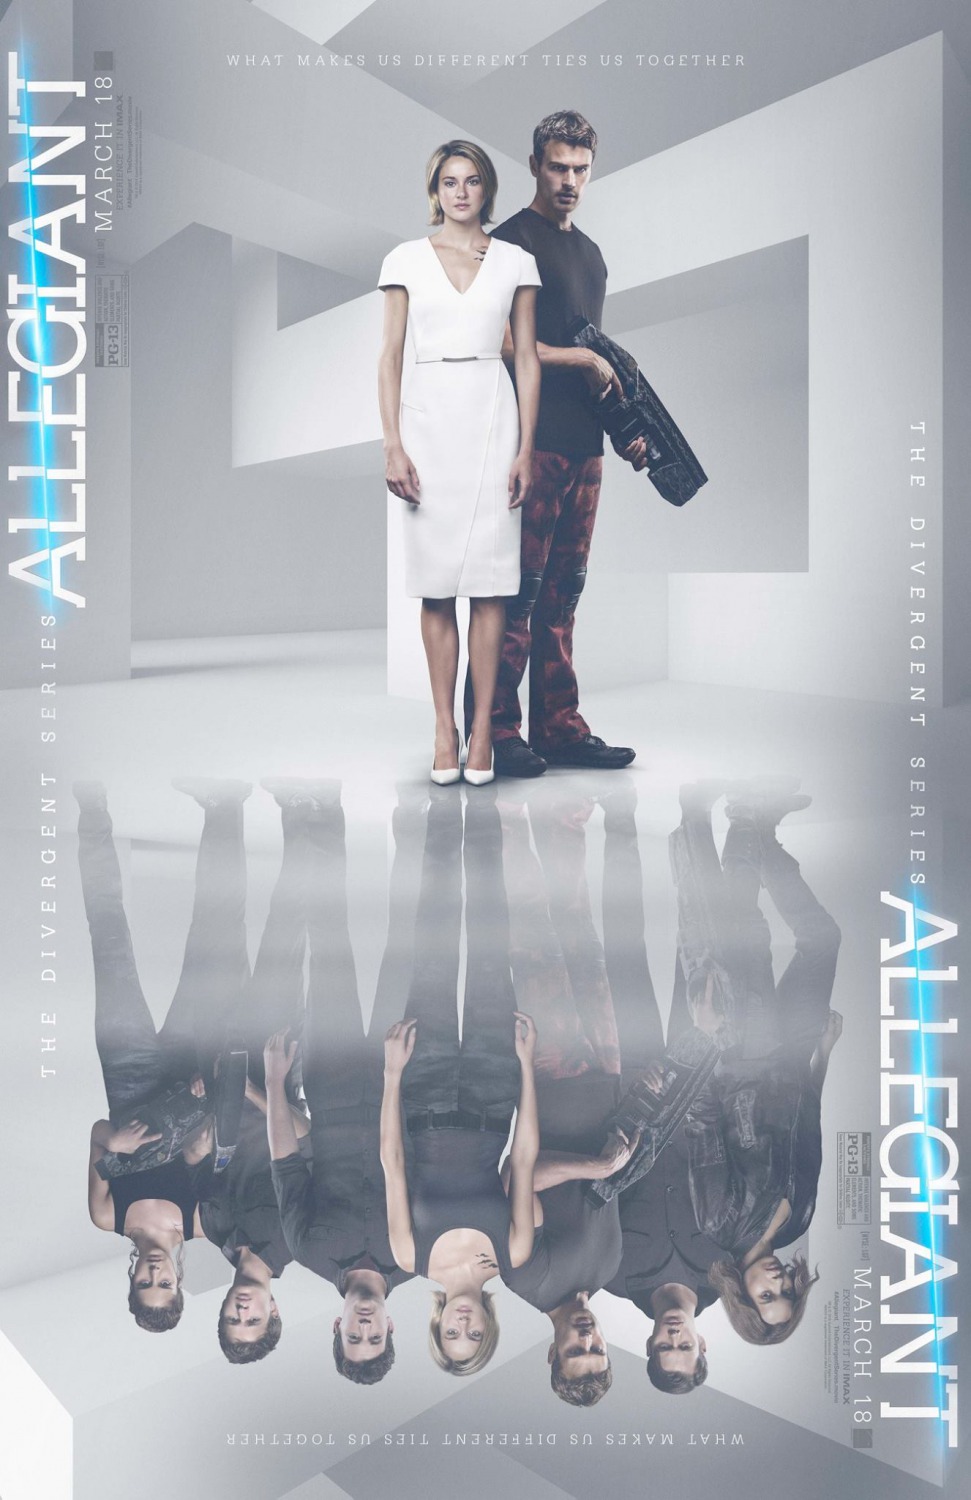 Extra Large Movie Poster Image for The Divergent Series: Allegiant (#16 of 20)